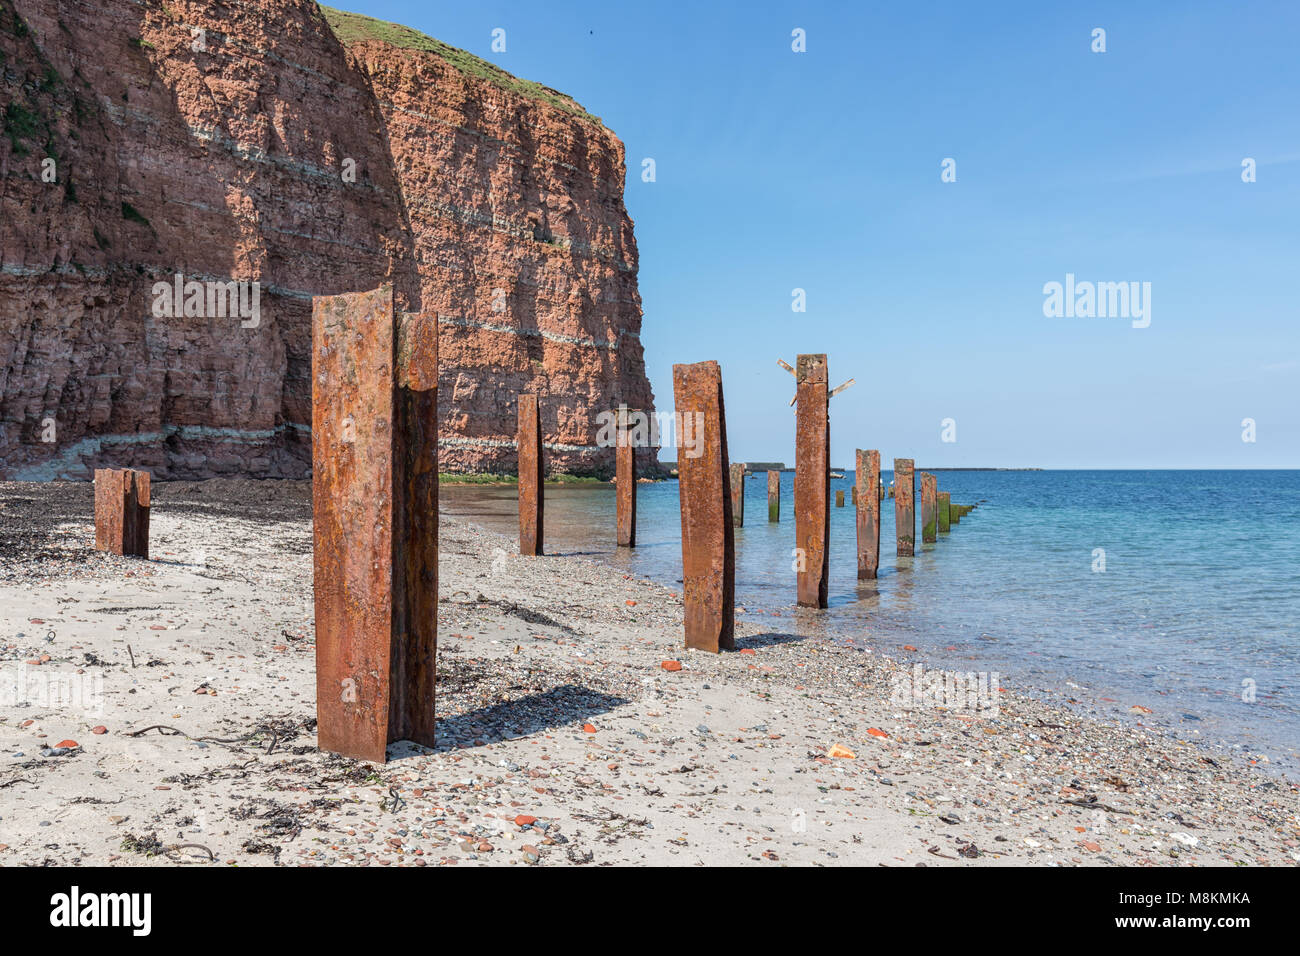 Beach Helgoland island with red cliffs and rusty iron pillars Stock Photo